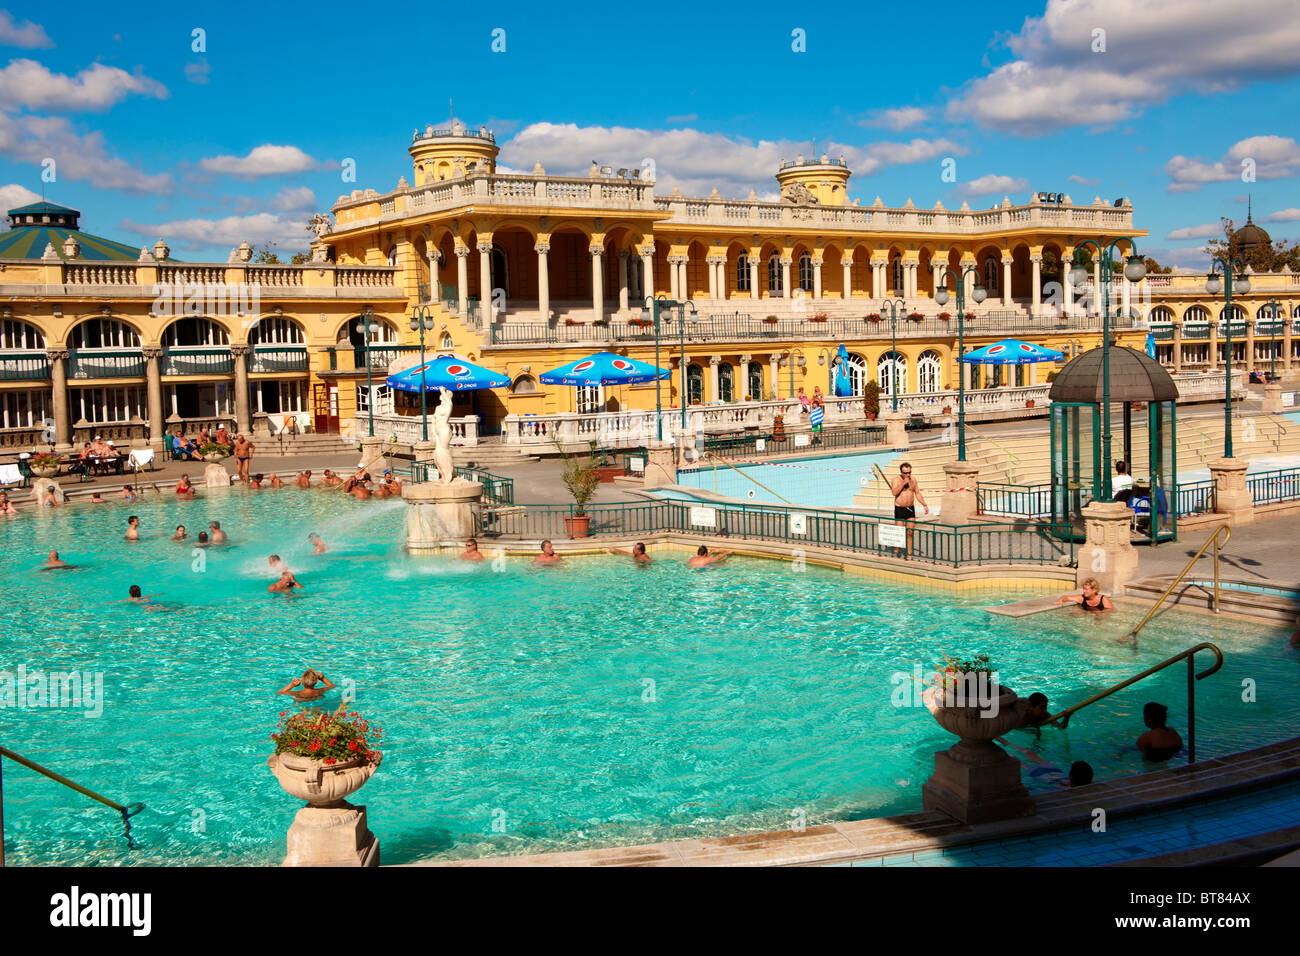 The largest medicinal thermal baths in Europe. The Neo baroque Szechenyi baths, City Park, budapest, Hungary Stock Photo